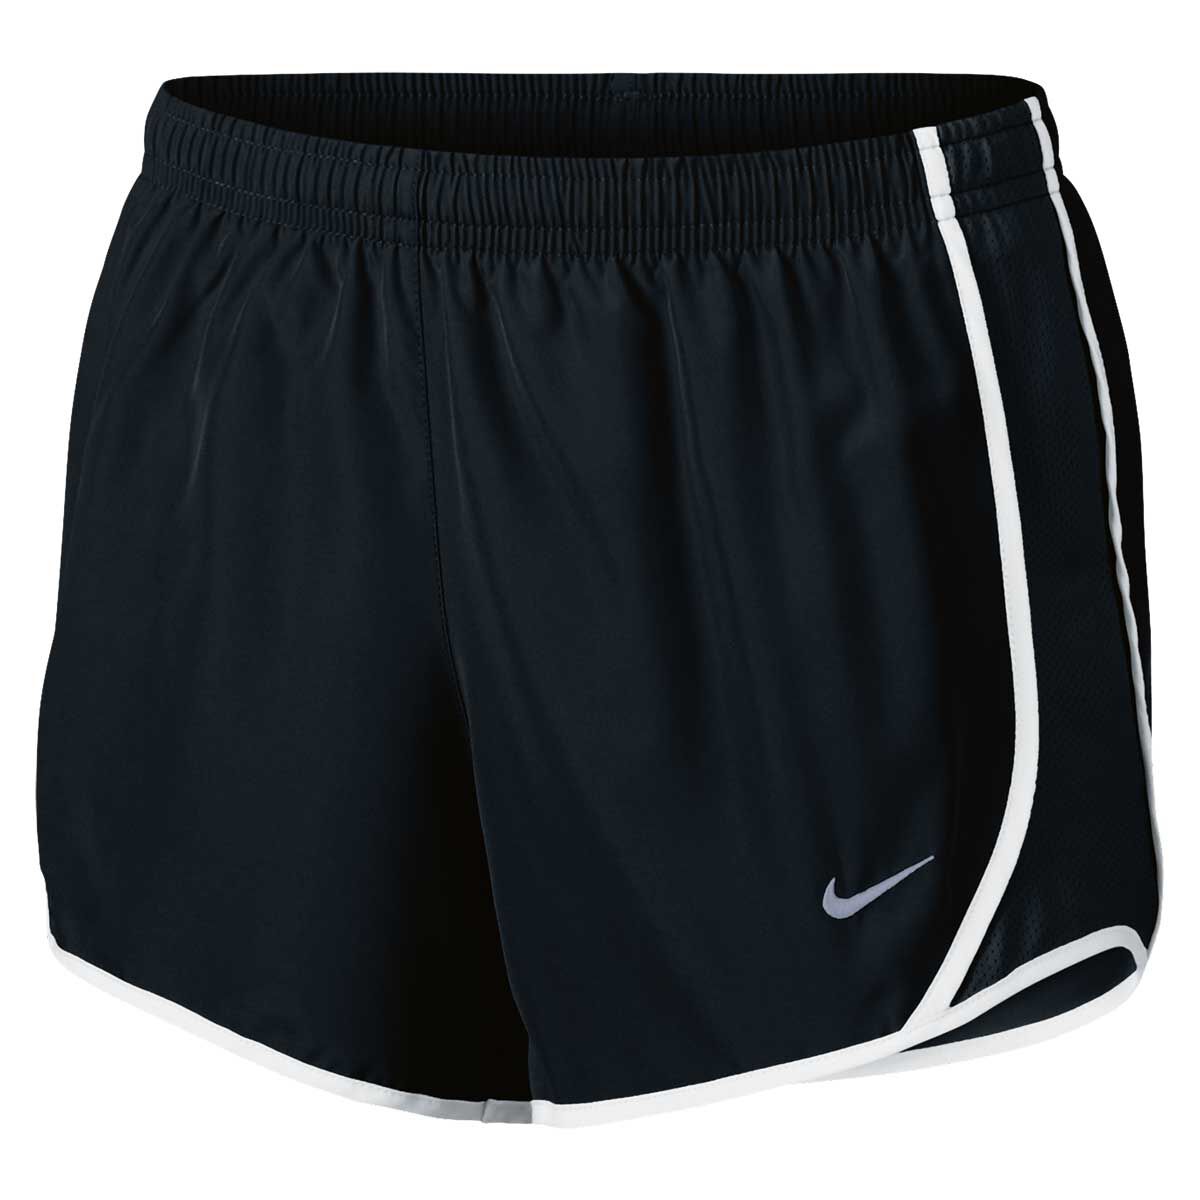  Girl's Nike Dry Running Shorts, Girl's Nike Shorts with  Sweat-Wicking Fabric, Black/Black/Black/White, S : Clothing, Shoes & Jewelry